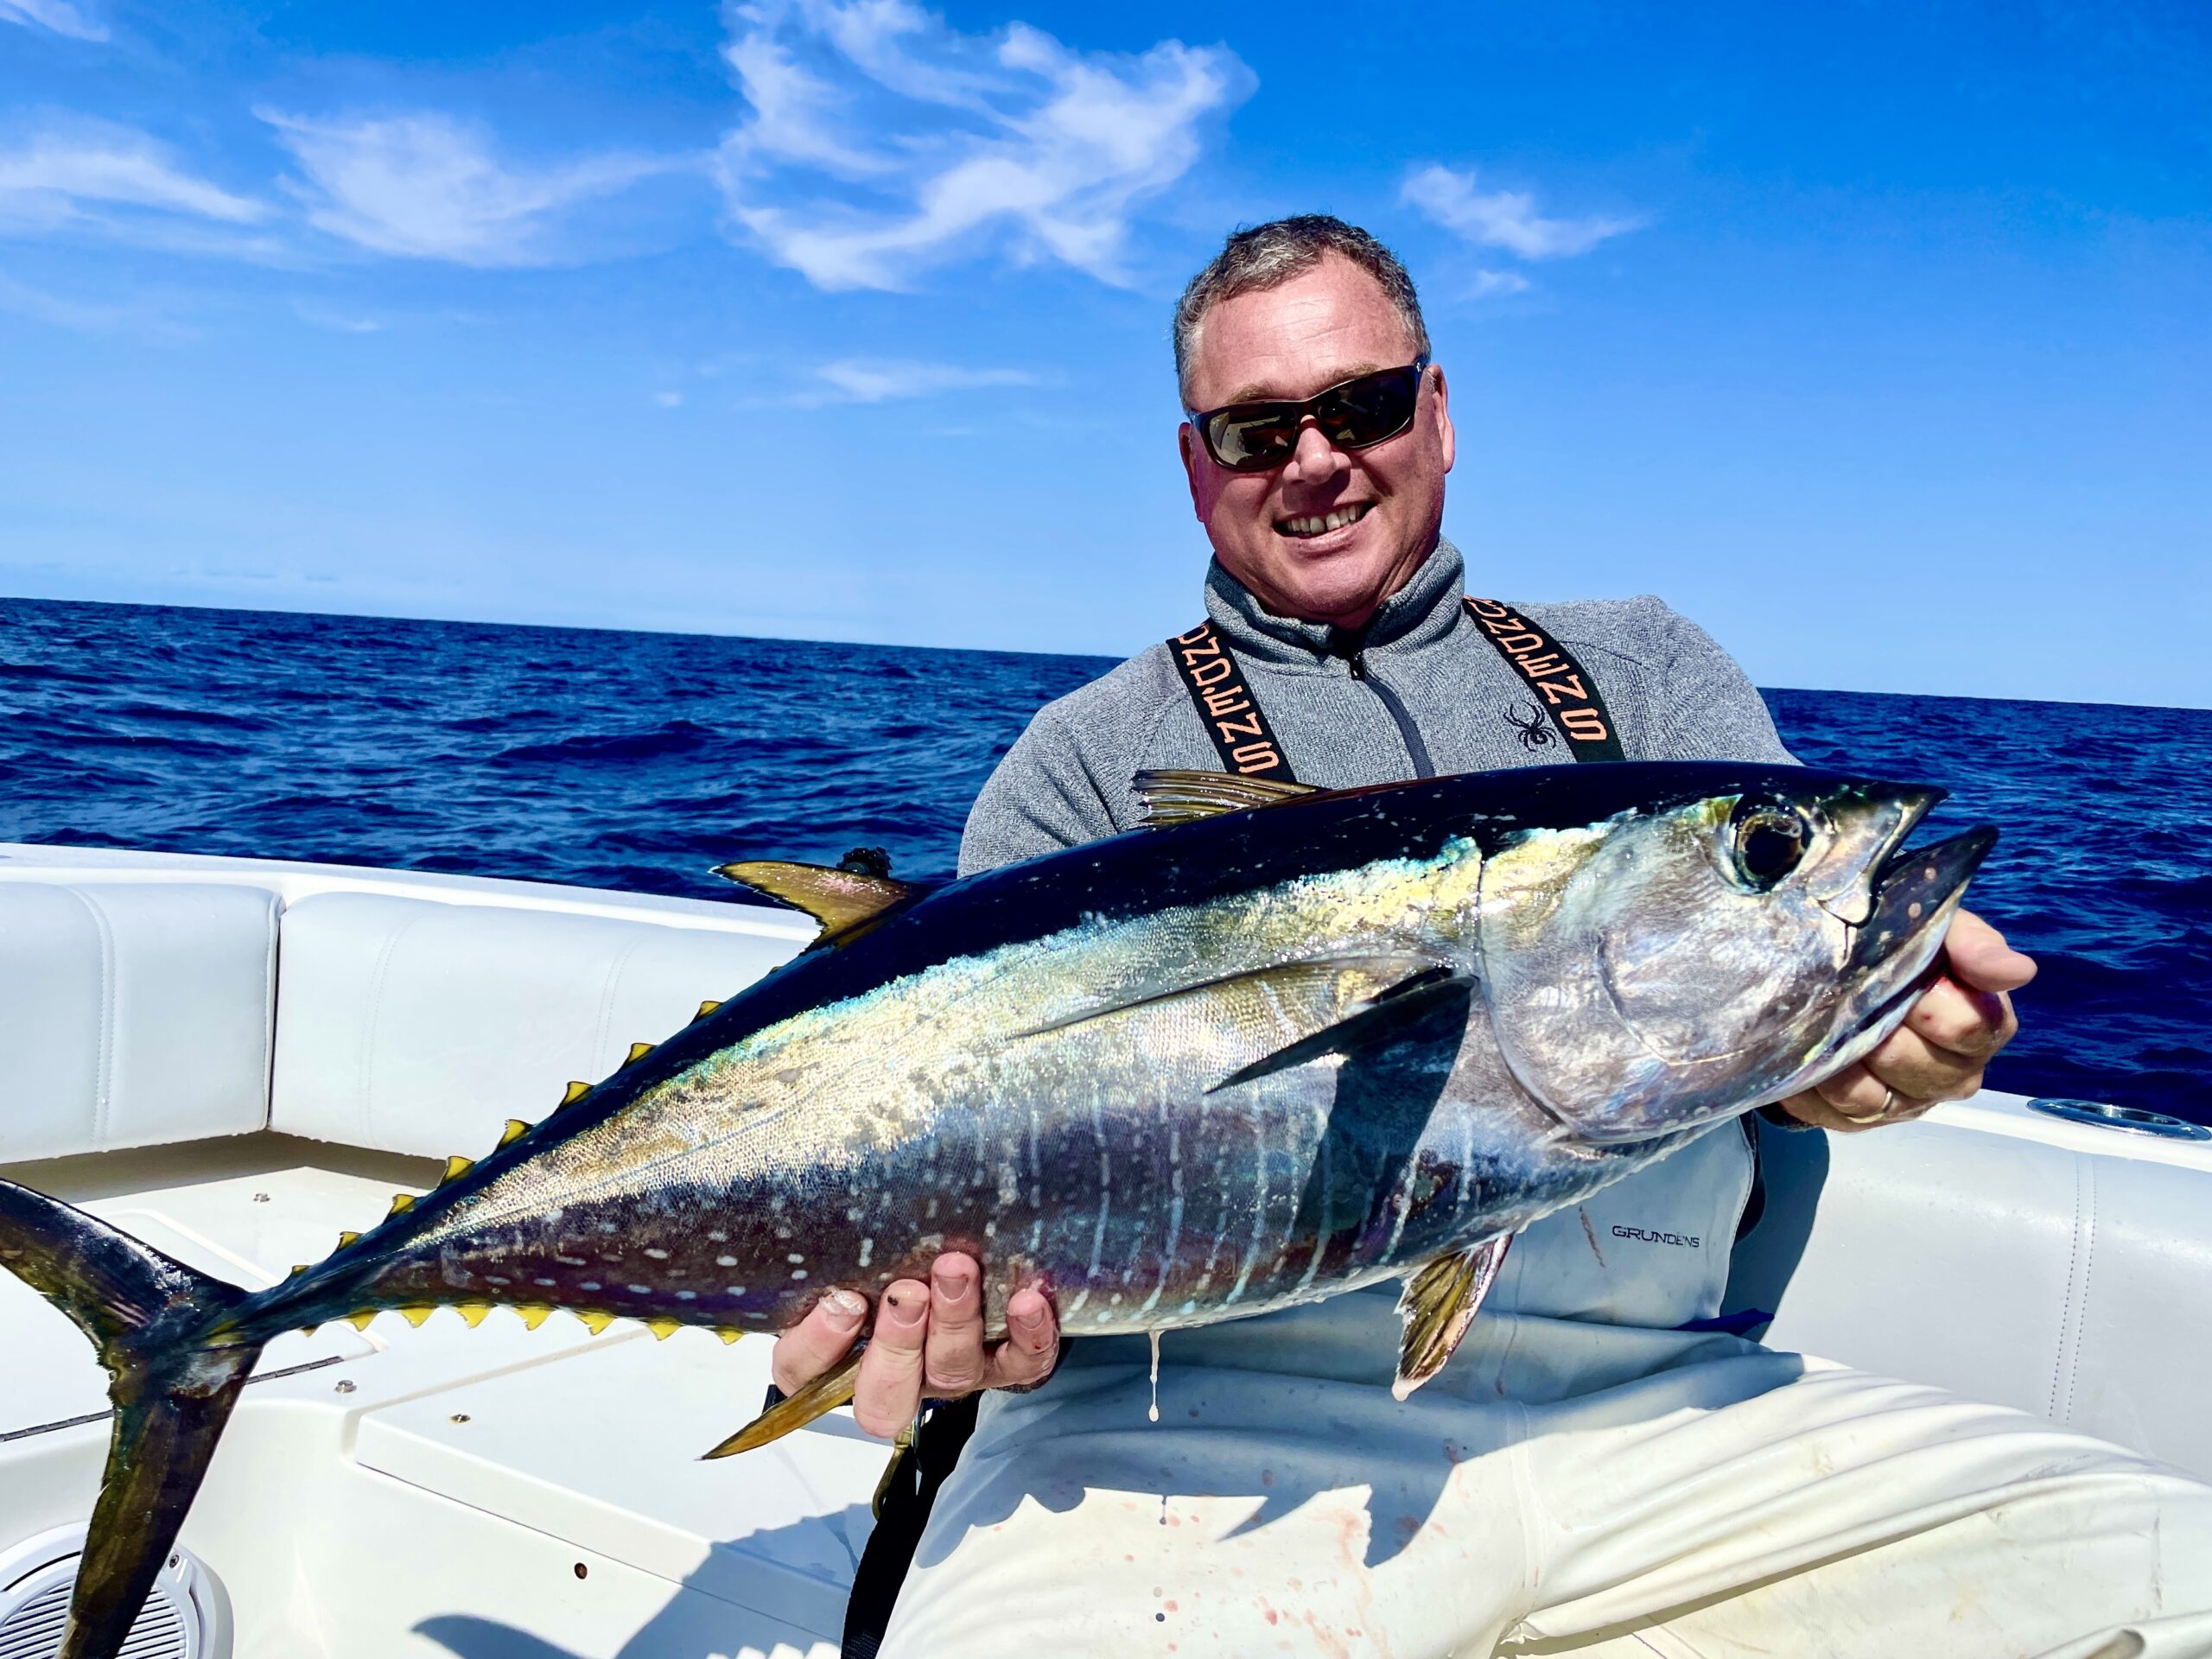 Keith Robertson with one of the mid-sized tunas, a yellowfin, in our waters these days.